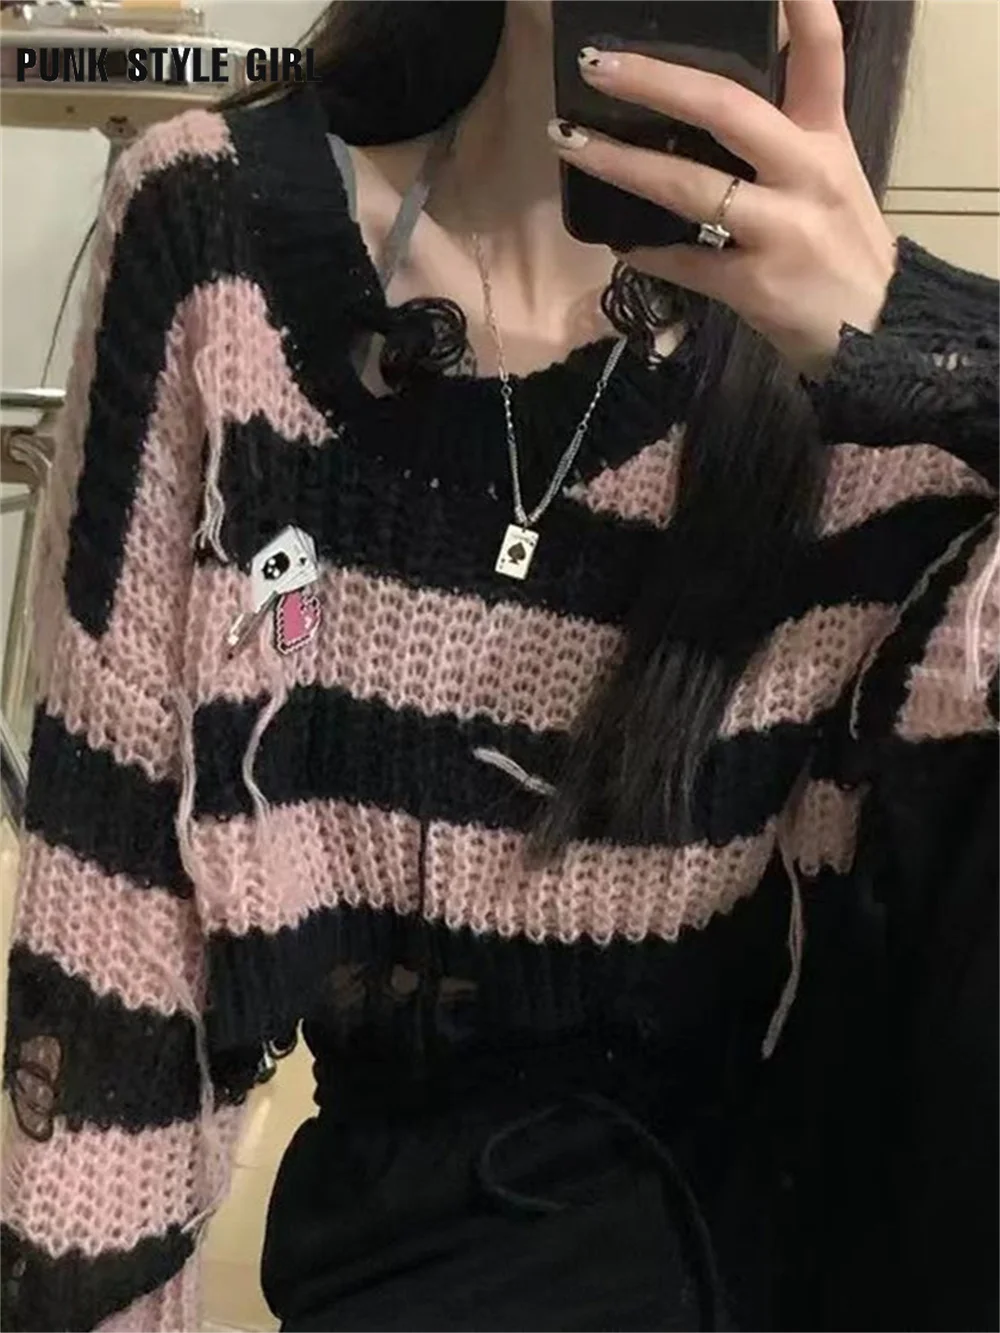 

Pink Stripe Sweater Women Kpop Clothes Gothic Mall Jumpers 2000s Mori Girl Short Crop Tops hHole Goth Clothes Grunge Fairy Tees